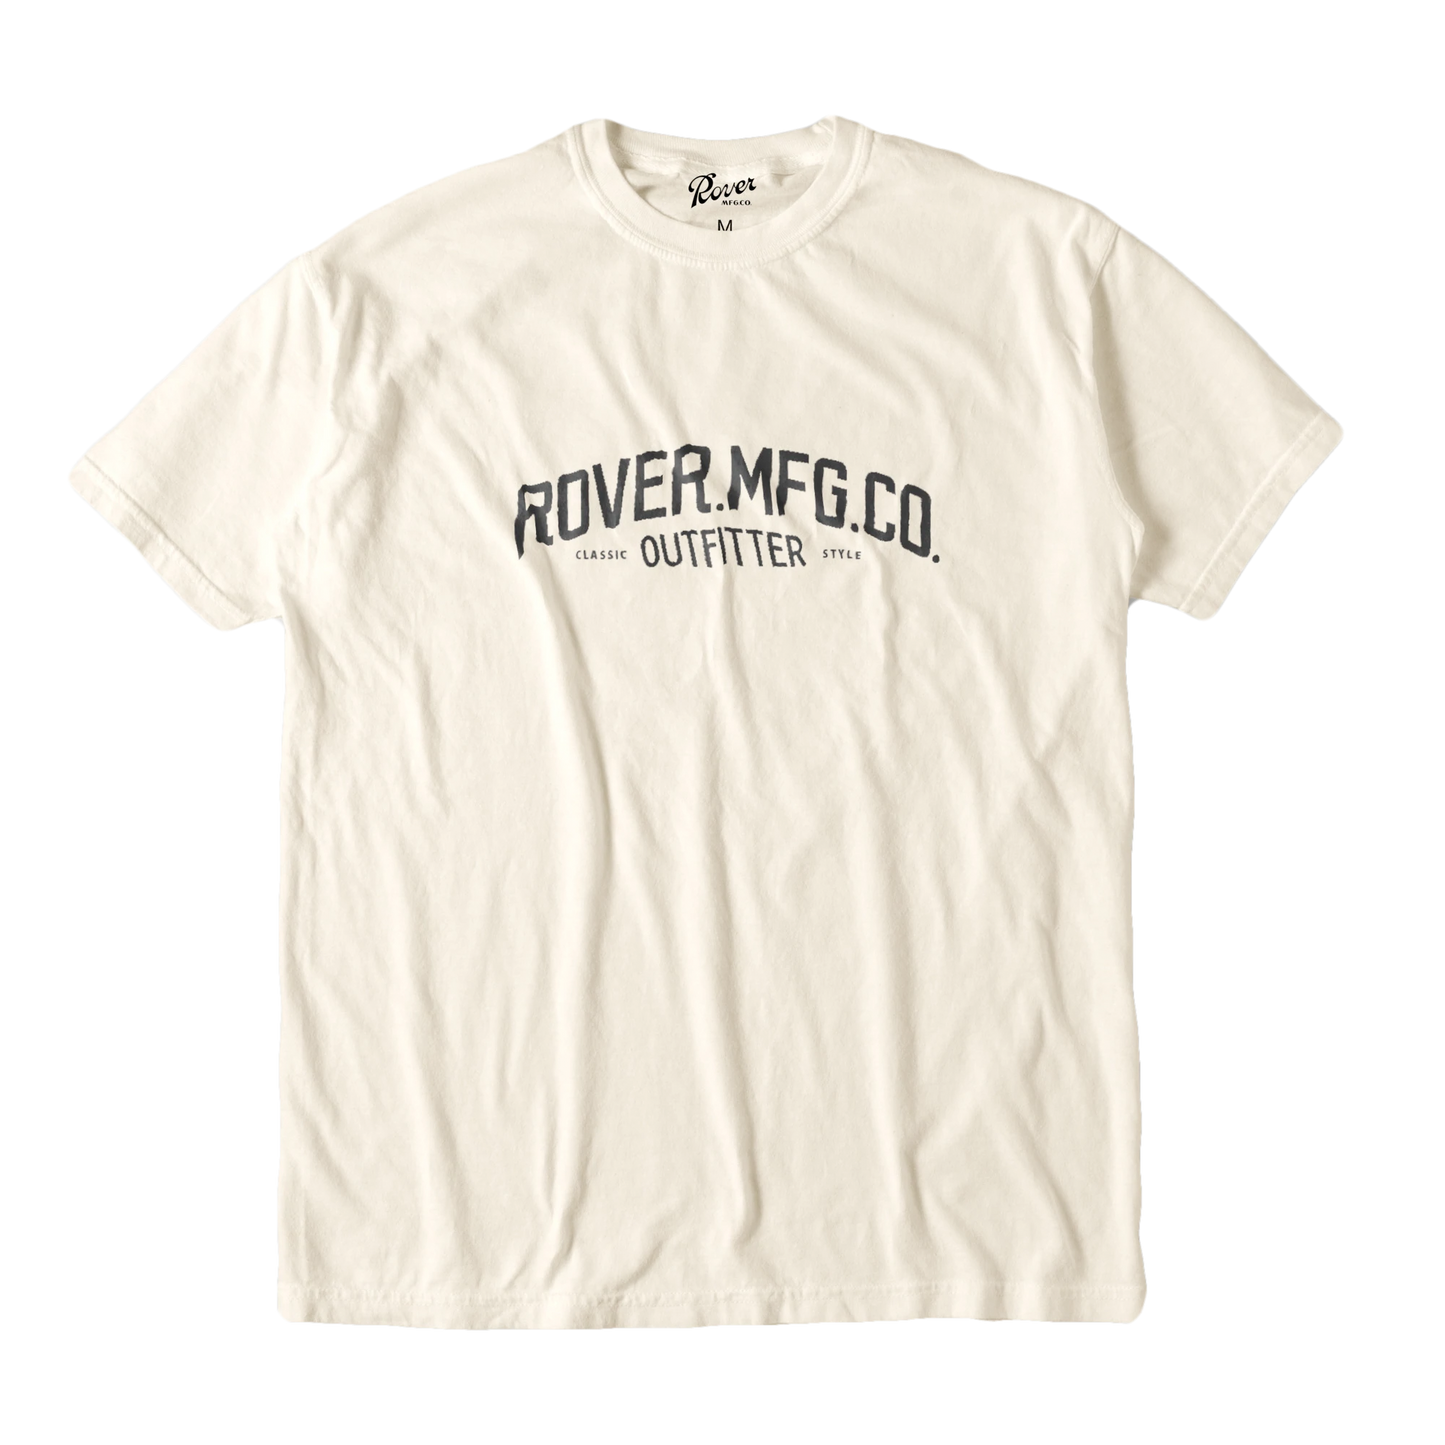 Classic Col. / ROVER.MFG.Co T-shirt